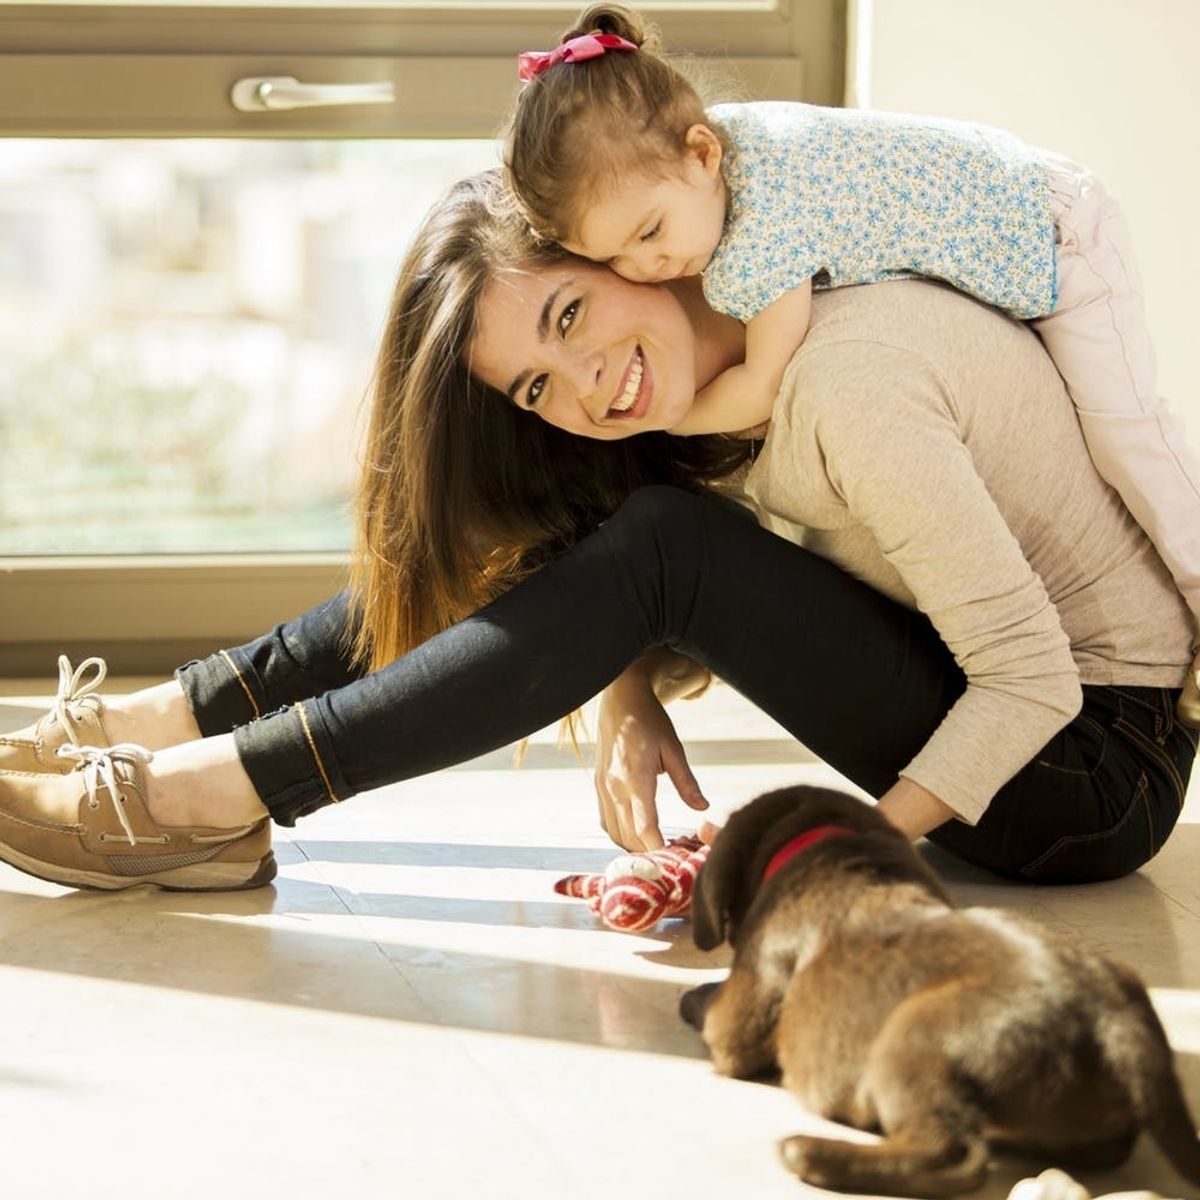 12 Must-Ask Questions for Your New Babysitter